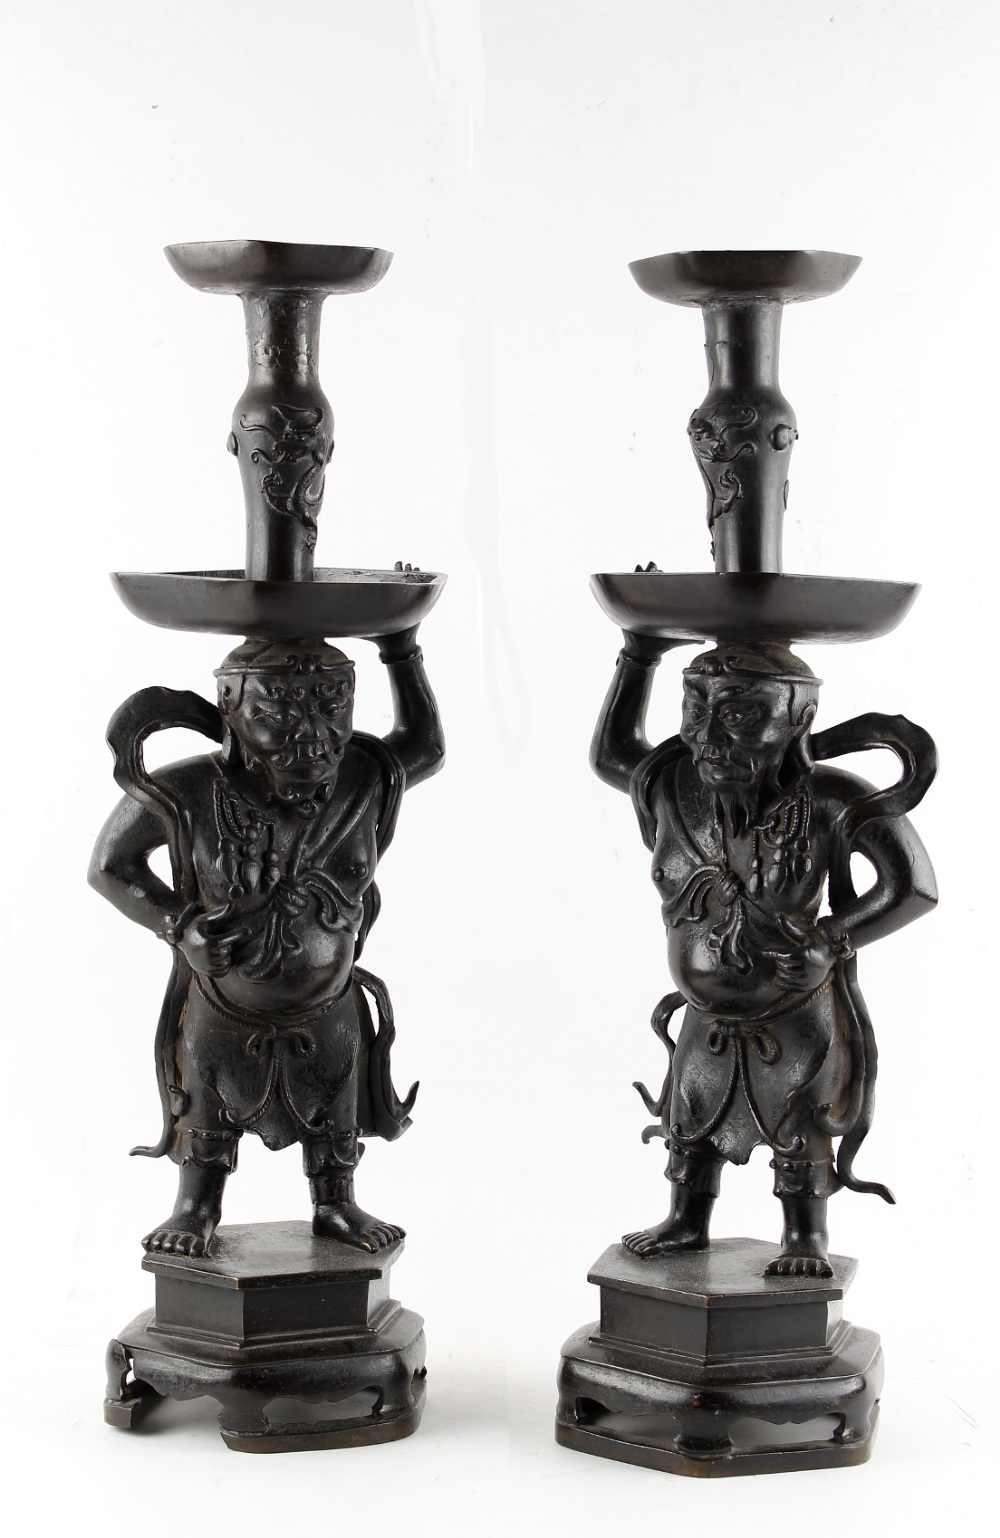 A pair of Chinese bronze standing figures, Ming Dynasty (1368-1644), previously pricket - Image 2 of 2